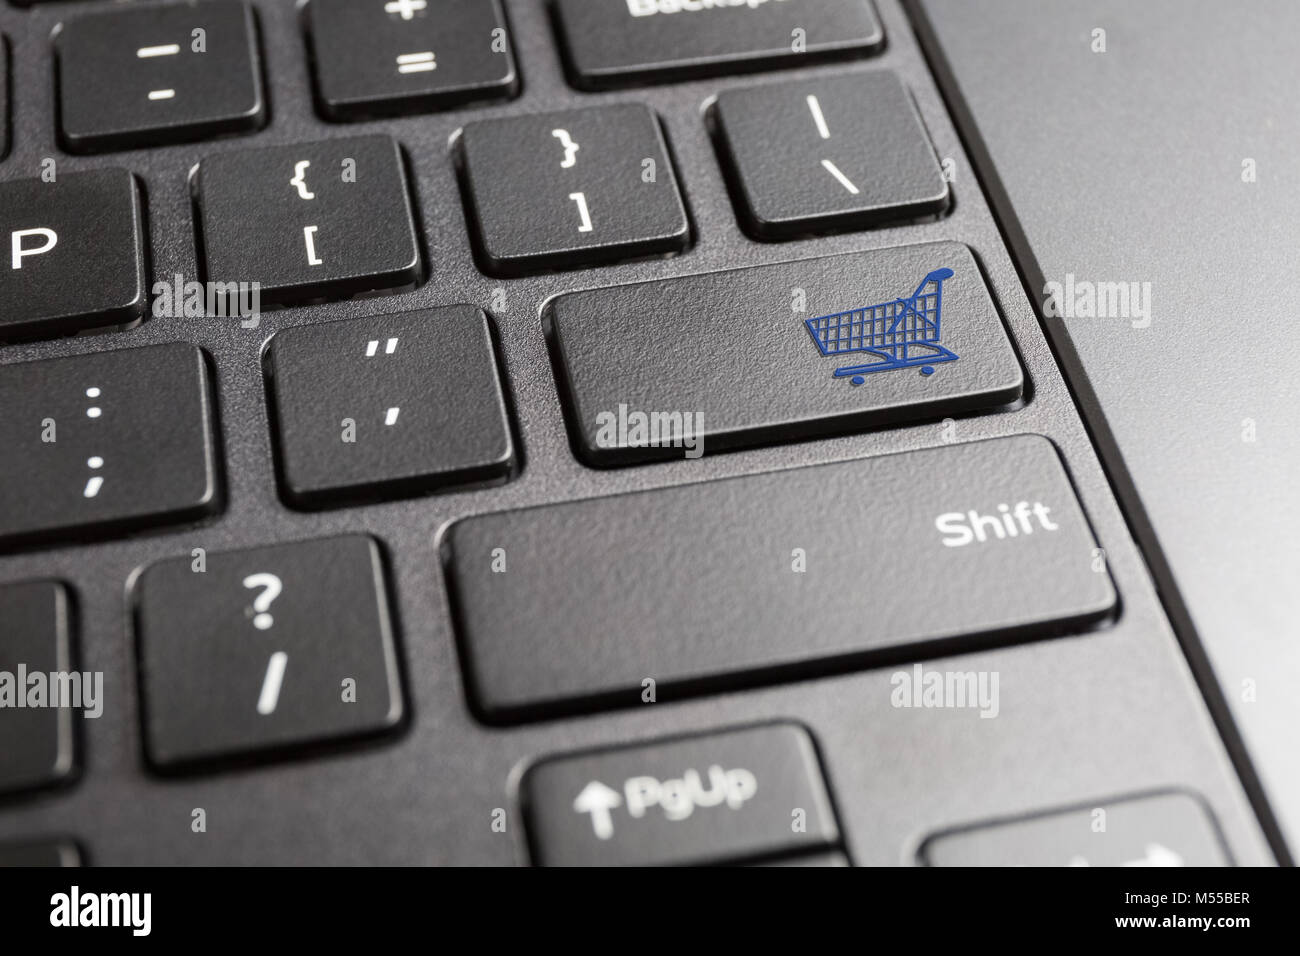 computer keyboard with shopping cart icon Stock Photo